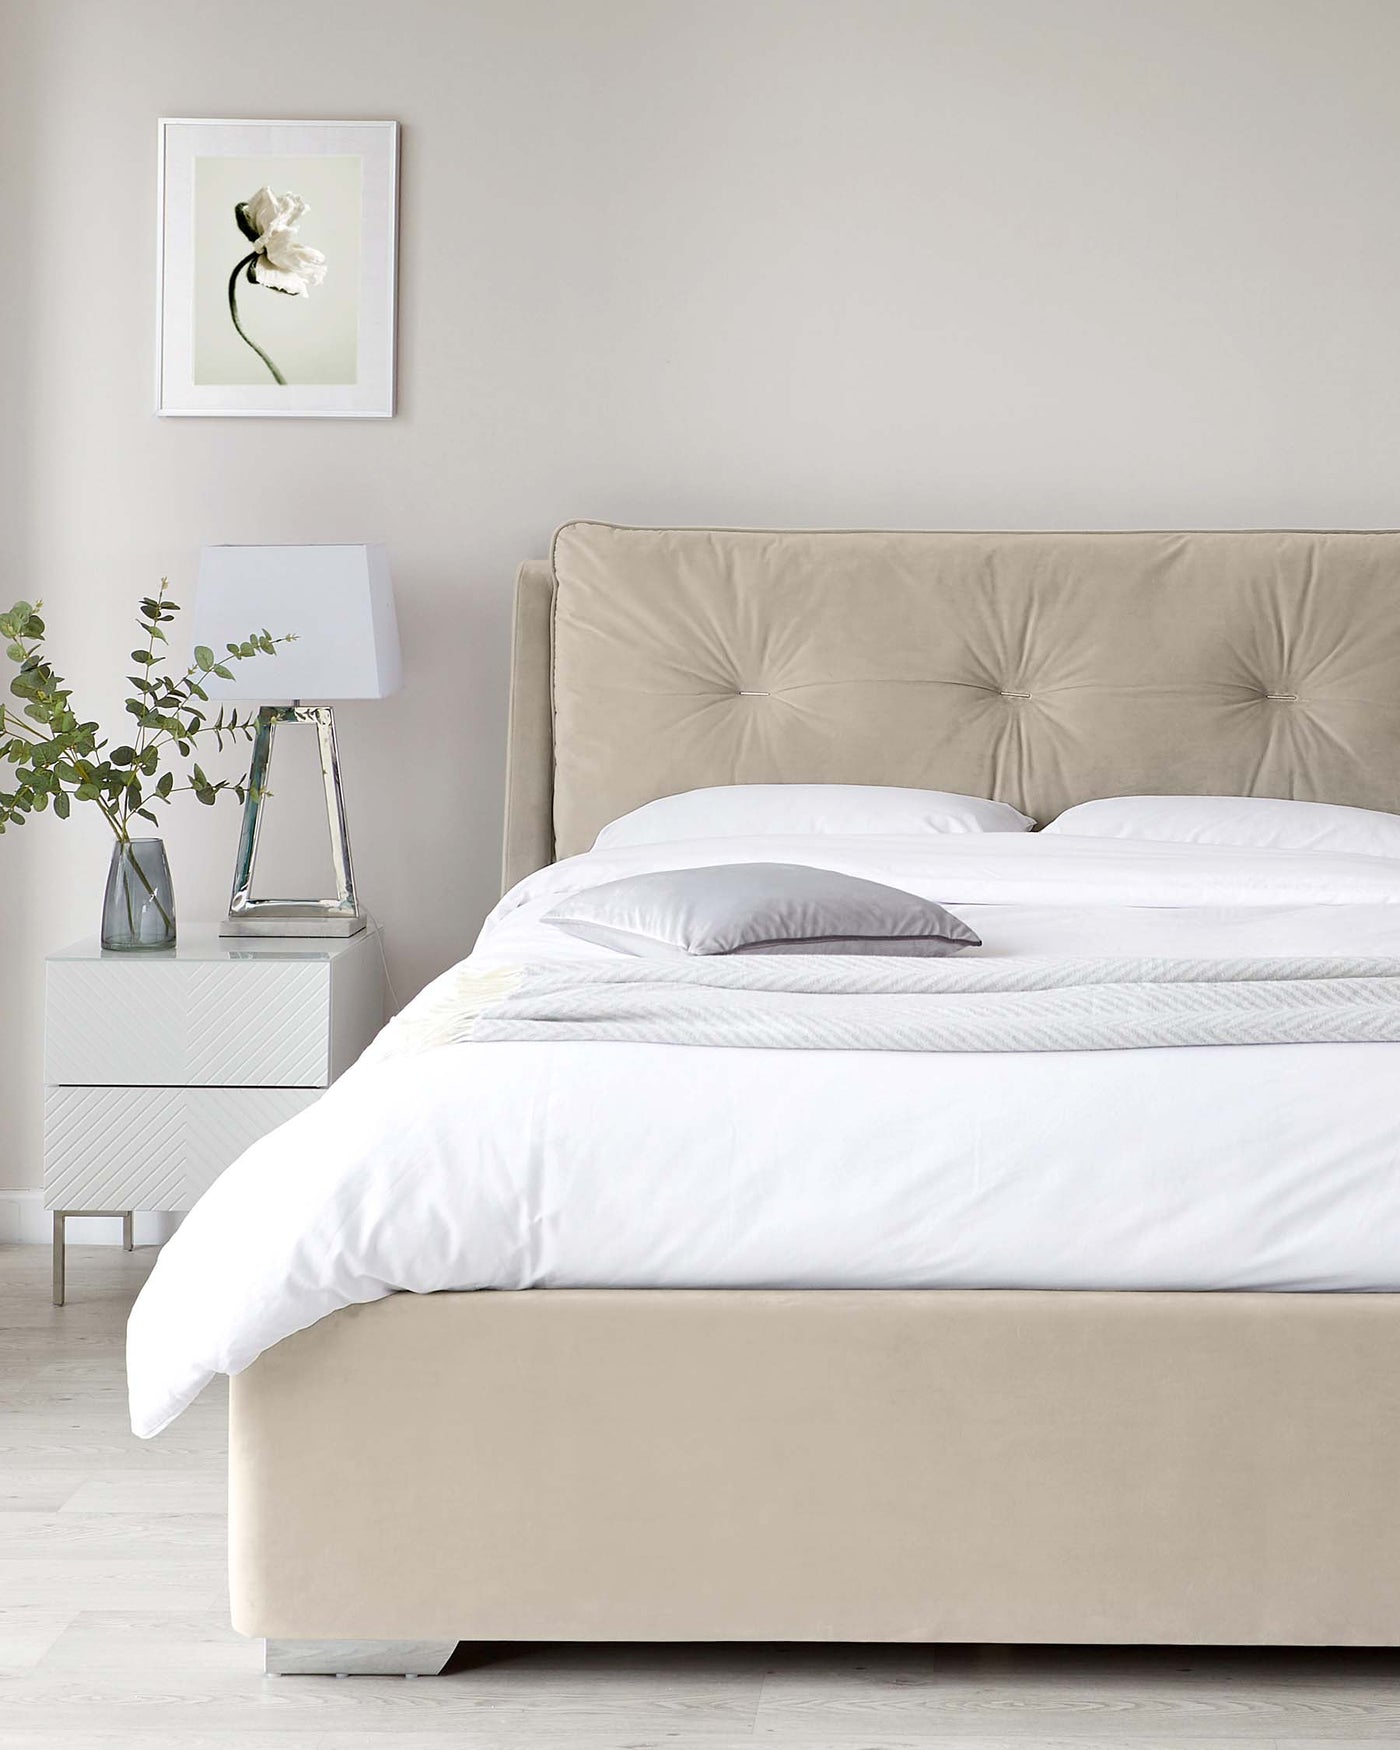 Elegant contemporary bedroom featuring a king-sized bed with an upholstered beige headboard showcasing button tufting, complemented by crisp white bedding. Beside the bed stands a sleek white nightstand topped with a modern clear glass lamp with a white lampshade.